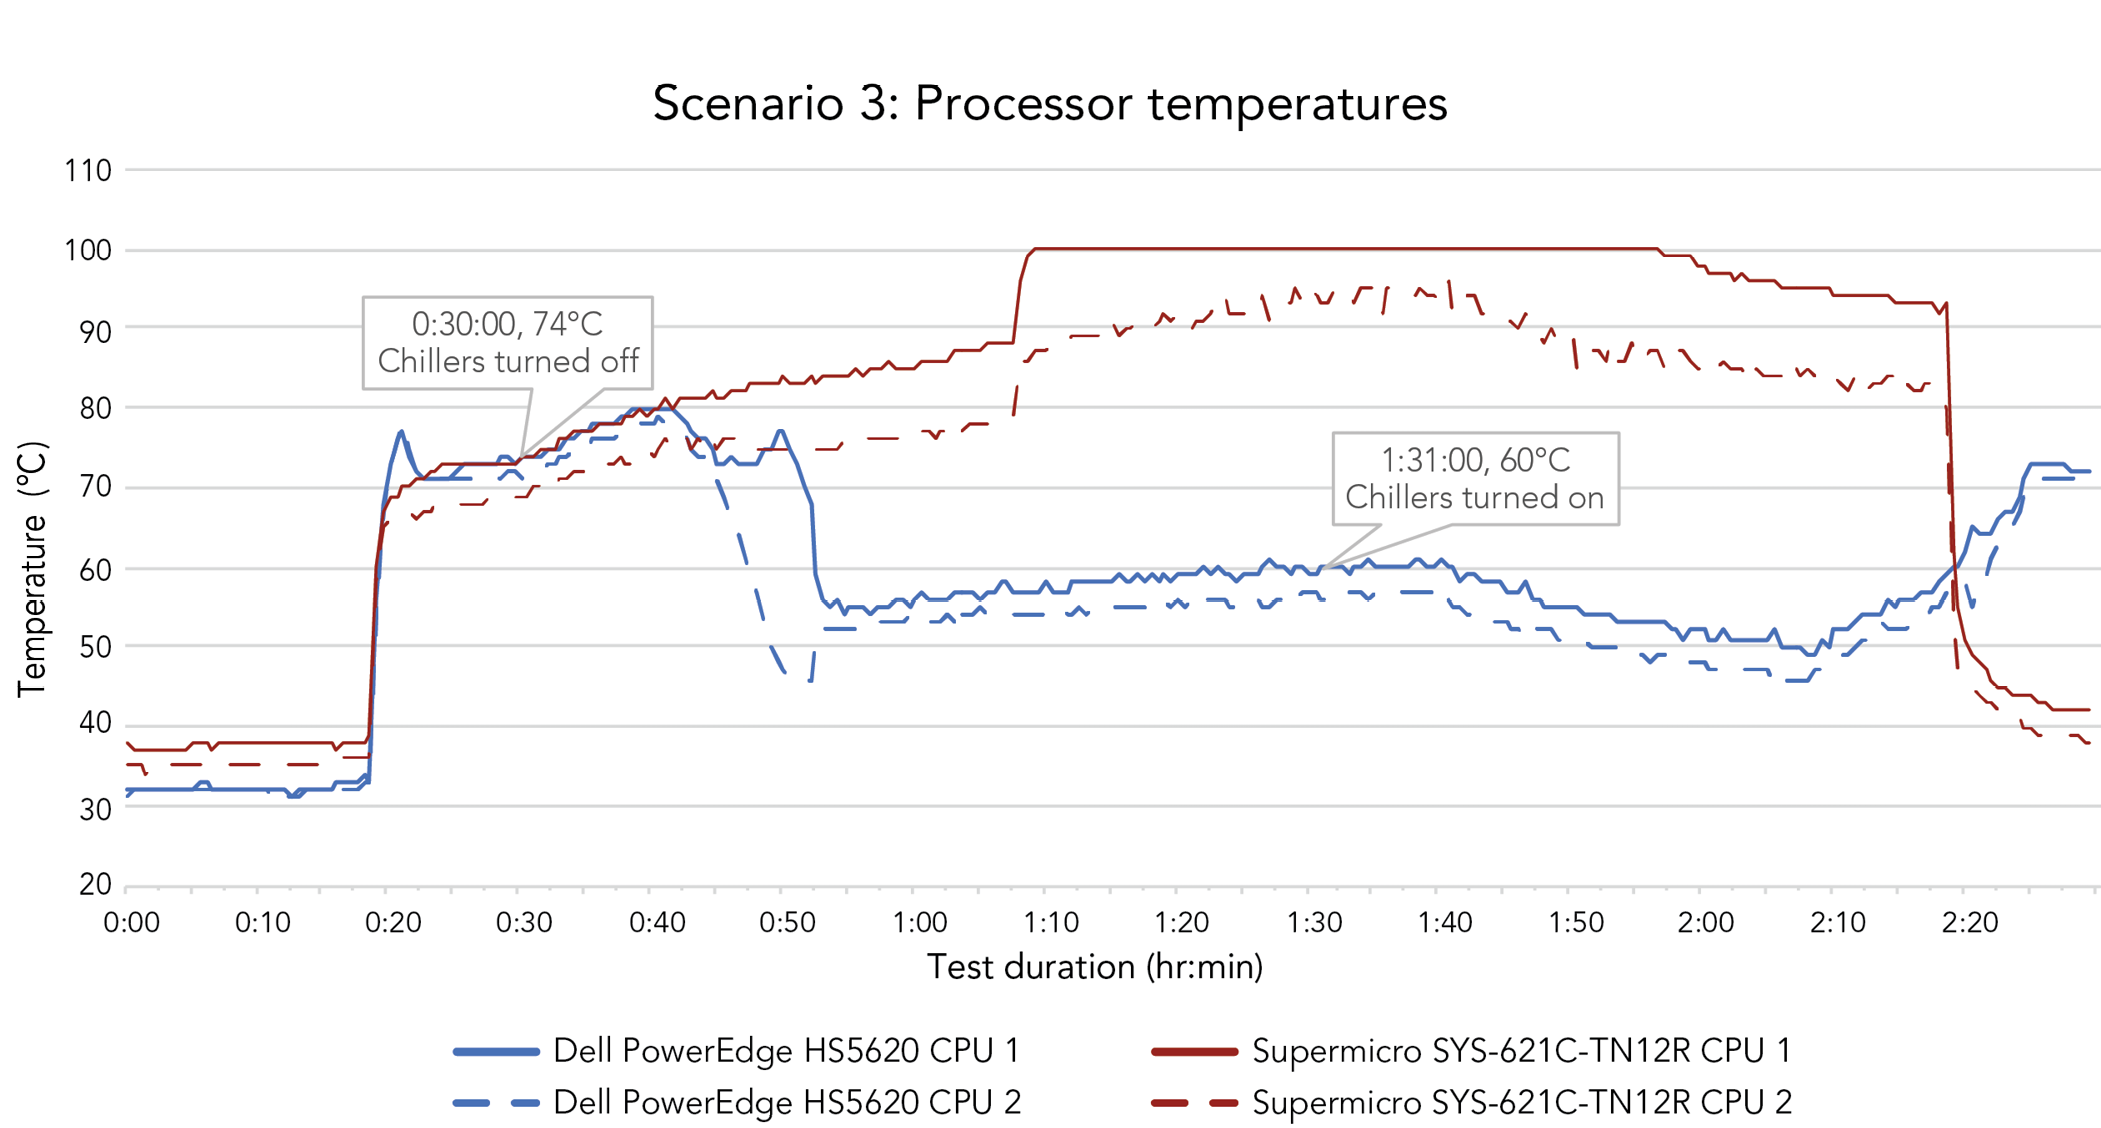 A line graph comparing each system’s processor temperatures over the course of the two-and-a-half-hour scenario 3 test, which includes an idle period 15 minutes before the workload began, the two-hour workload, and 15 minutes after the workload completed. The Dell PowerEdge HS5620 server’s two processors remained just over 30°C before the workload began, then rose when the workload started. At 30 minutes into the test, when the first processor was 74°C, we turned the chillers off. The processor temperatures peaked at about 80°C 40 minutes into the test. For the majority of the workload, they remained between 50°C and 60°C, through one of the processors dropped down to about 45°C at two points. We turned the chillers back on at 1 hour and 31 minutes into the test, when the first processor was 60°C. After the workload ended, the processors’ temperatures climbed from around 50°C to just over 70°C. In the Supermicro SYS‑621C-TN12R server, the processors started at between 35°C and 40°C. They rose to between 65°C and 70°C when the workload began, and climbed steadily until about 1 hour and 10 minutes for the first processor, which peaked at 100°C, and about 1 hour and 30 minutes for the second processor, which peaked around 95°C. After the system completed the workload, both processors’ temperatures dropped to around 40°C.